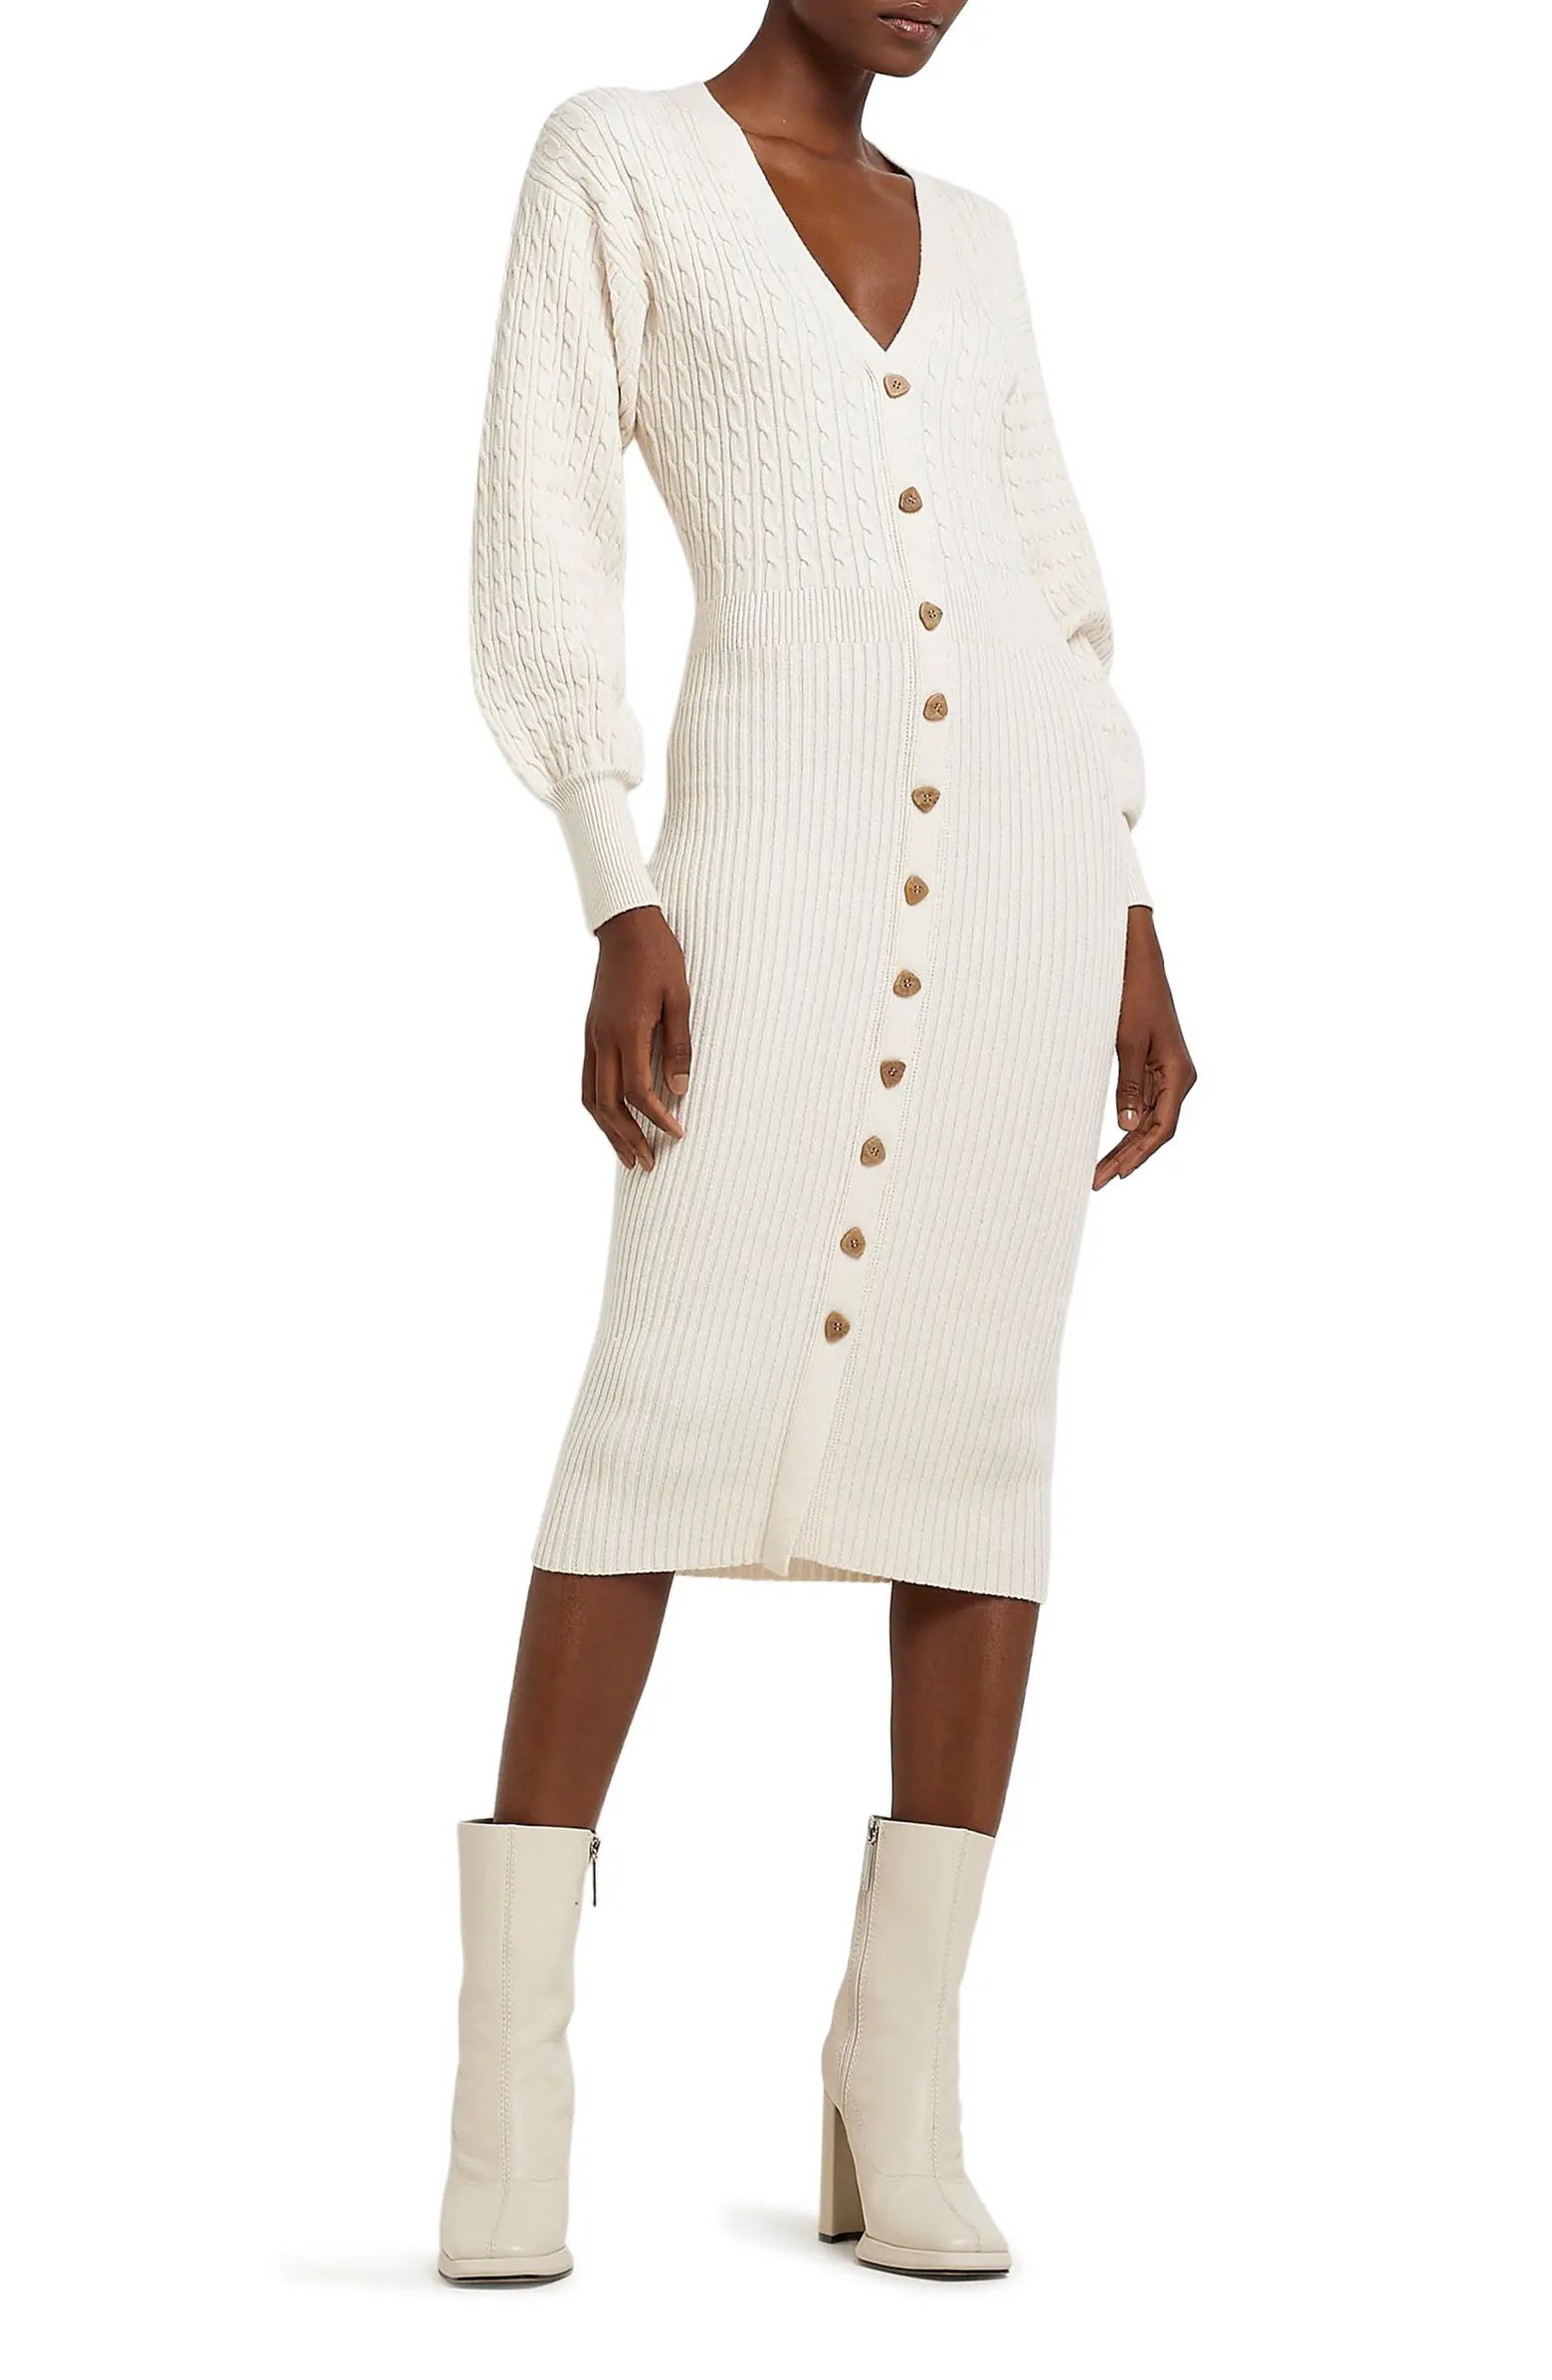 River Island Mixed Stitch Cardigan Sweater Dress | Nordstrom | Nordstrom